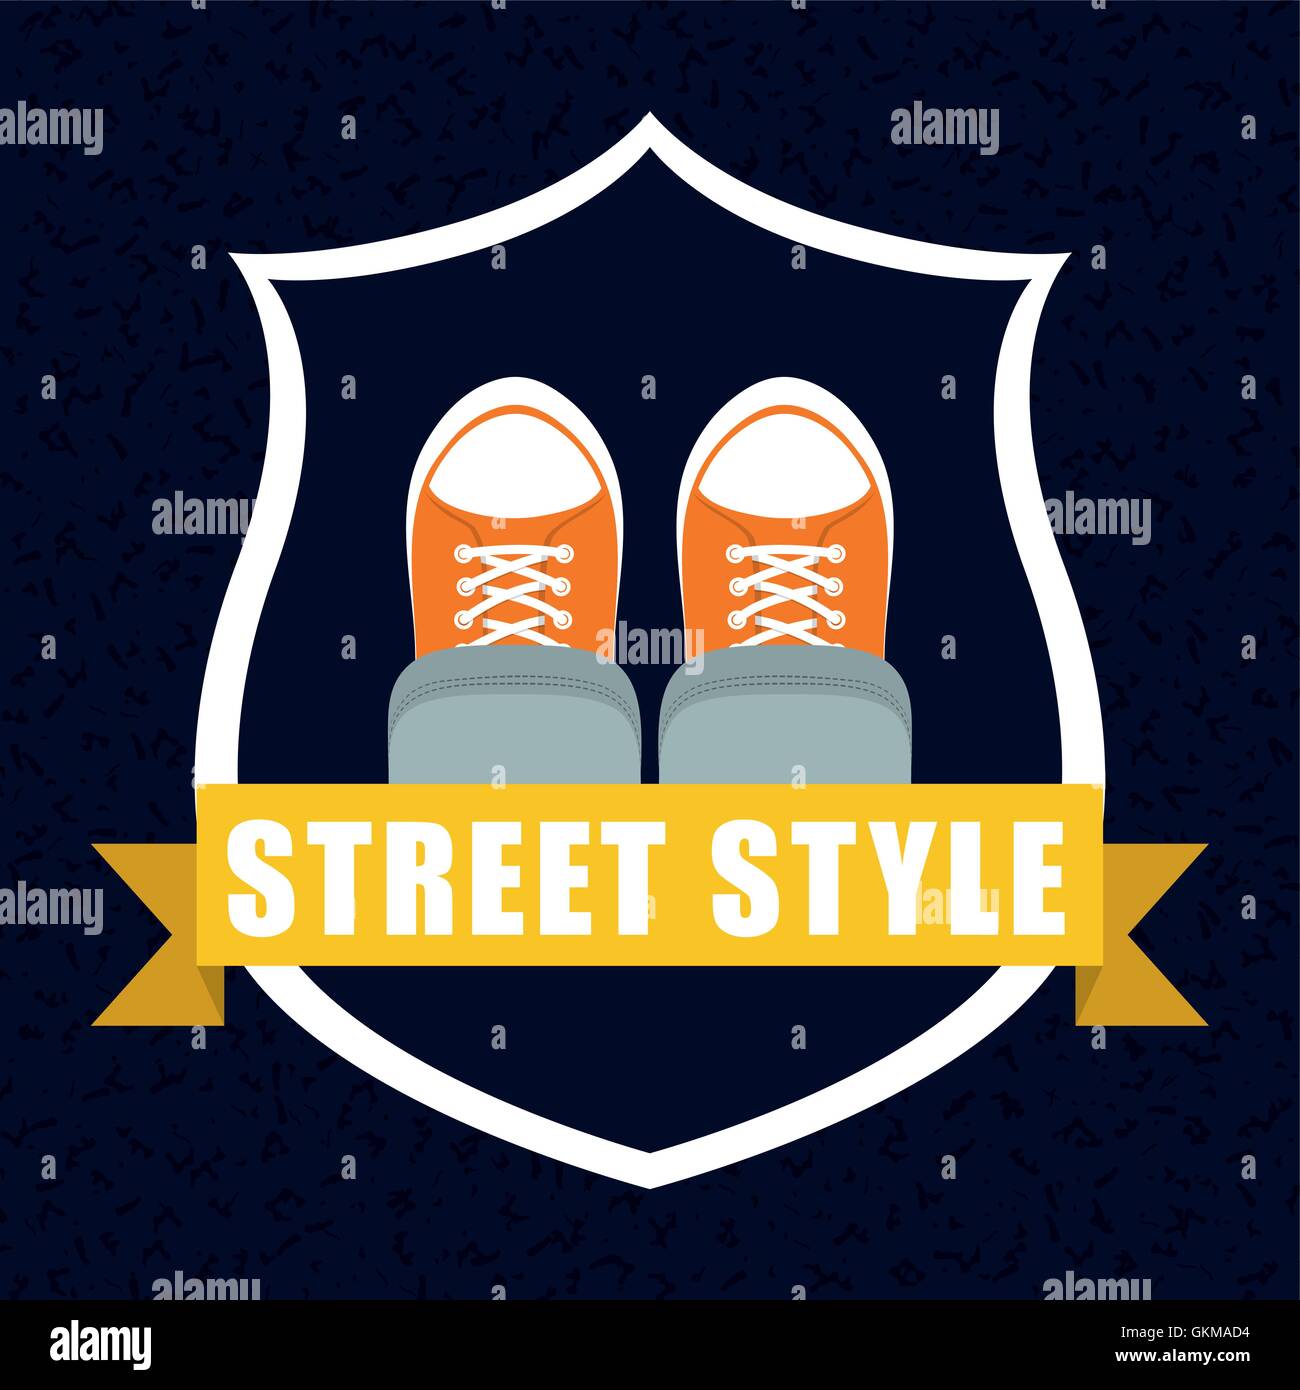 Street and urban style design , vector illustration Stock Vector